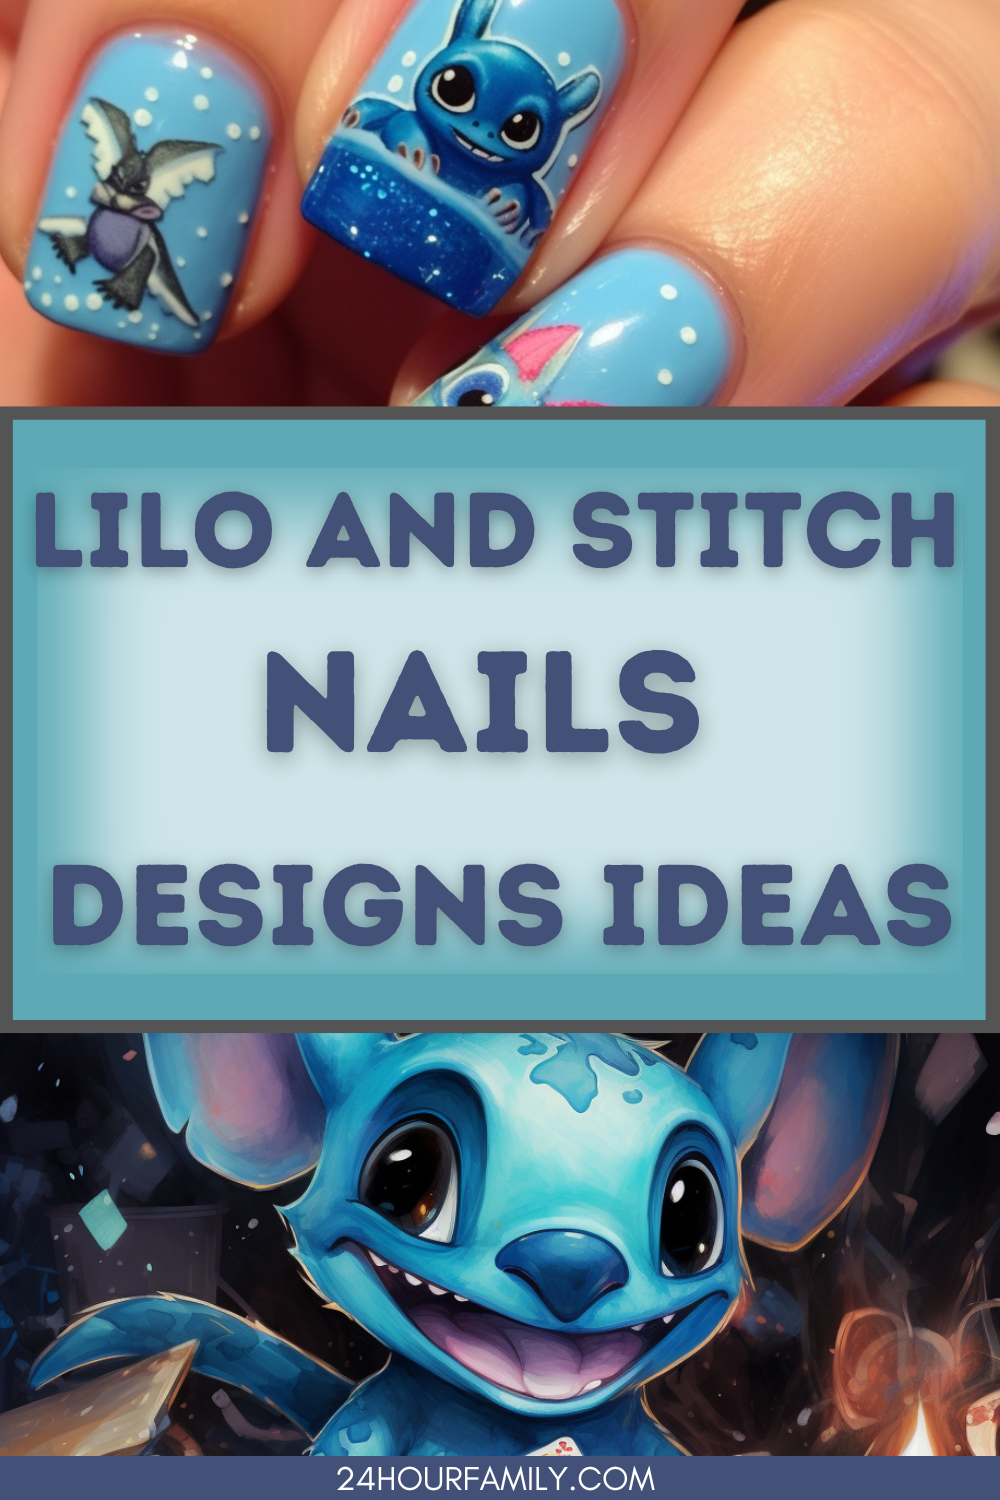 Stitch-Themed Nails Designs and Ideas